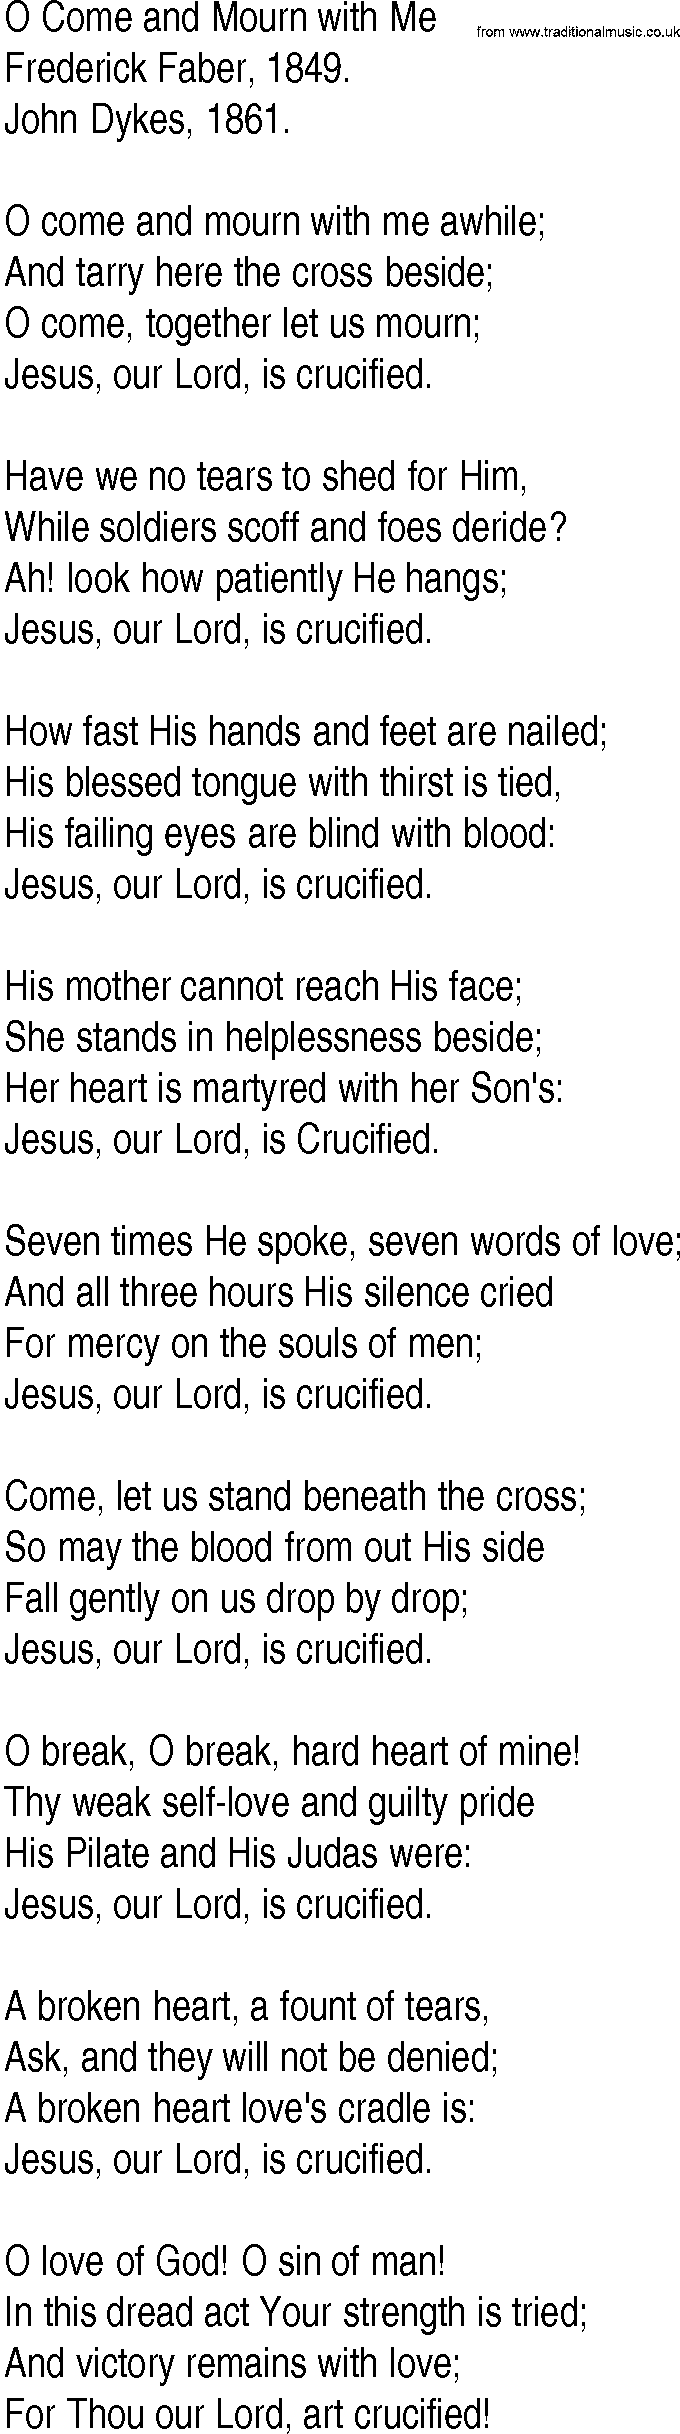 Hymn and Gospel Song: O Come and Mourn with Me by Frederick Faber lyrics